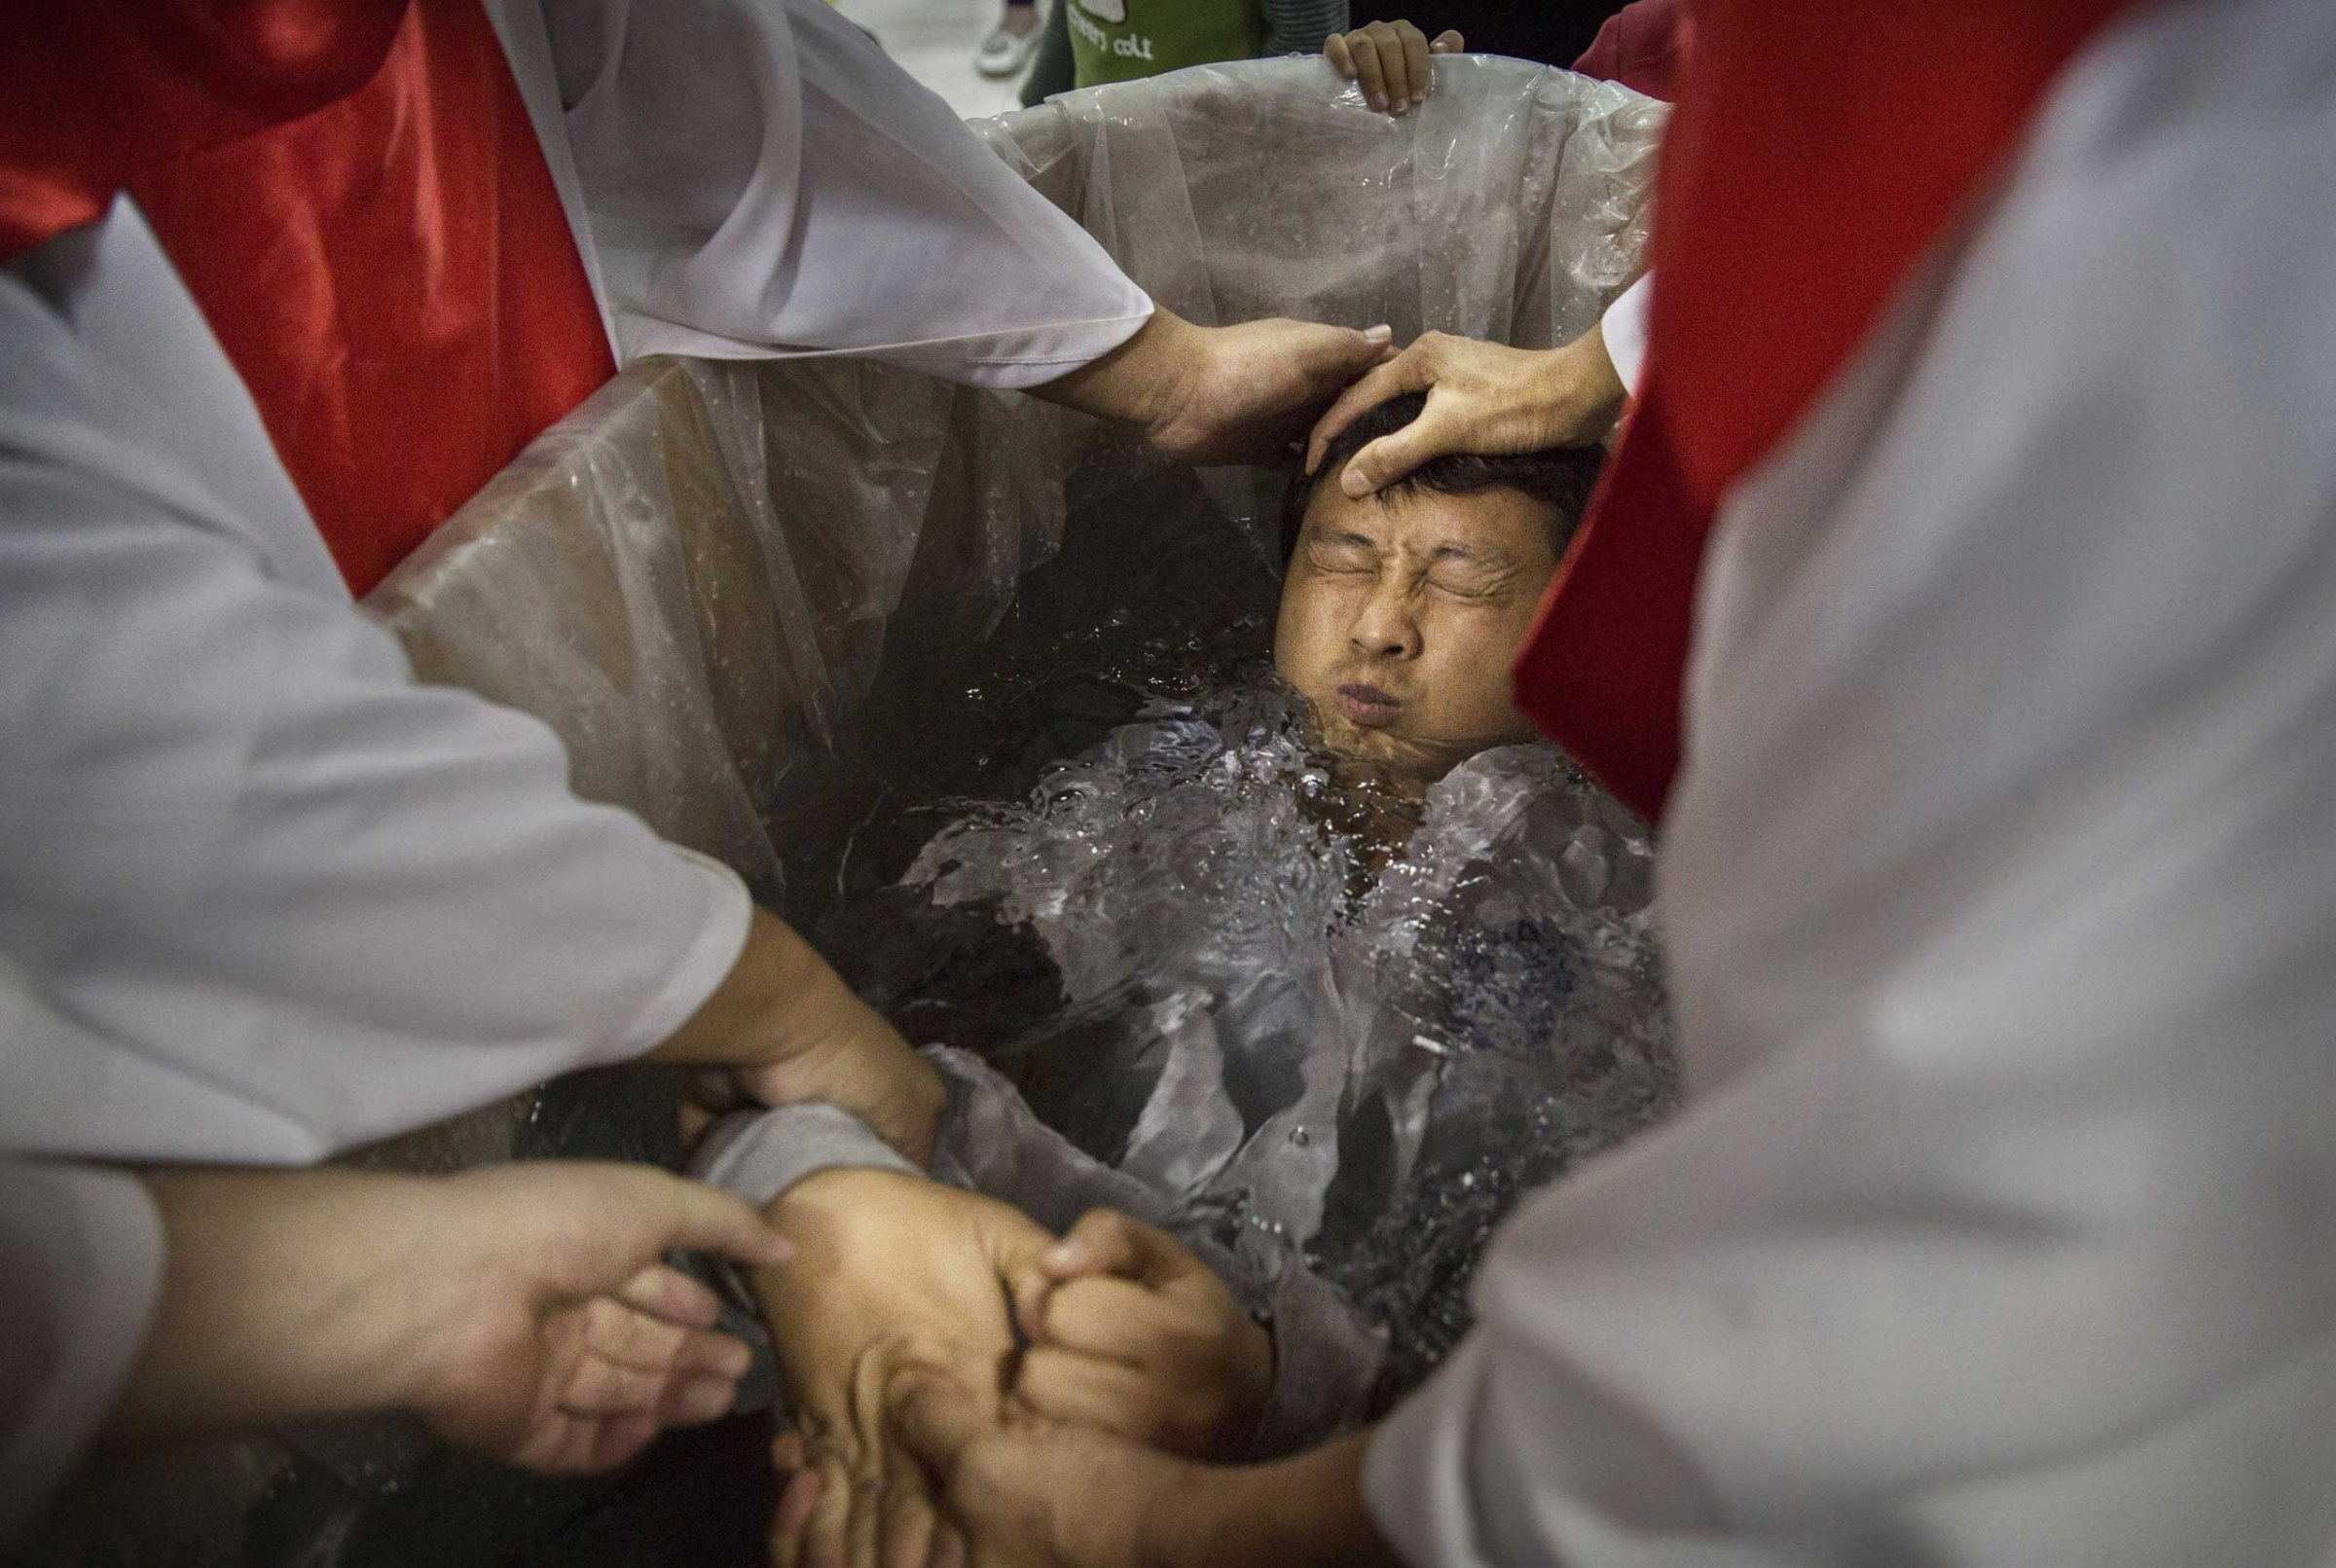 A new Christian man is dunked in the water in a small tub as he is baptized.